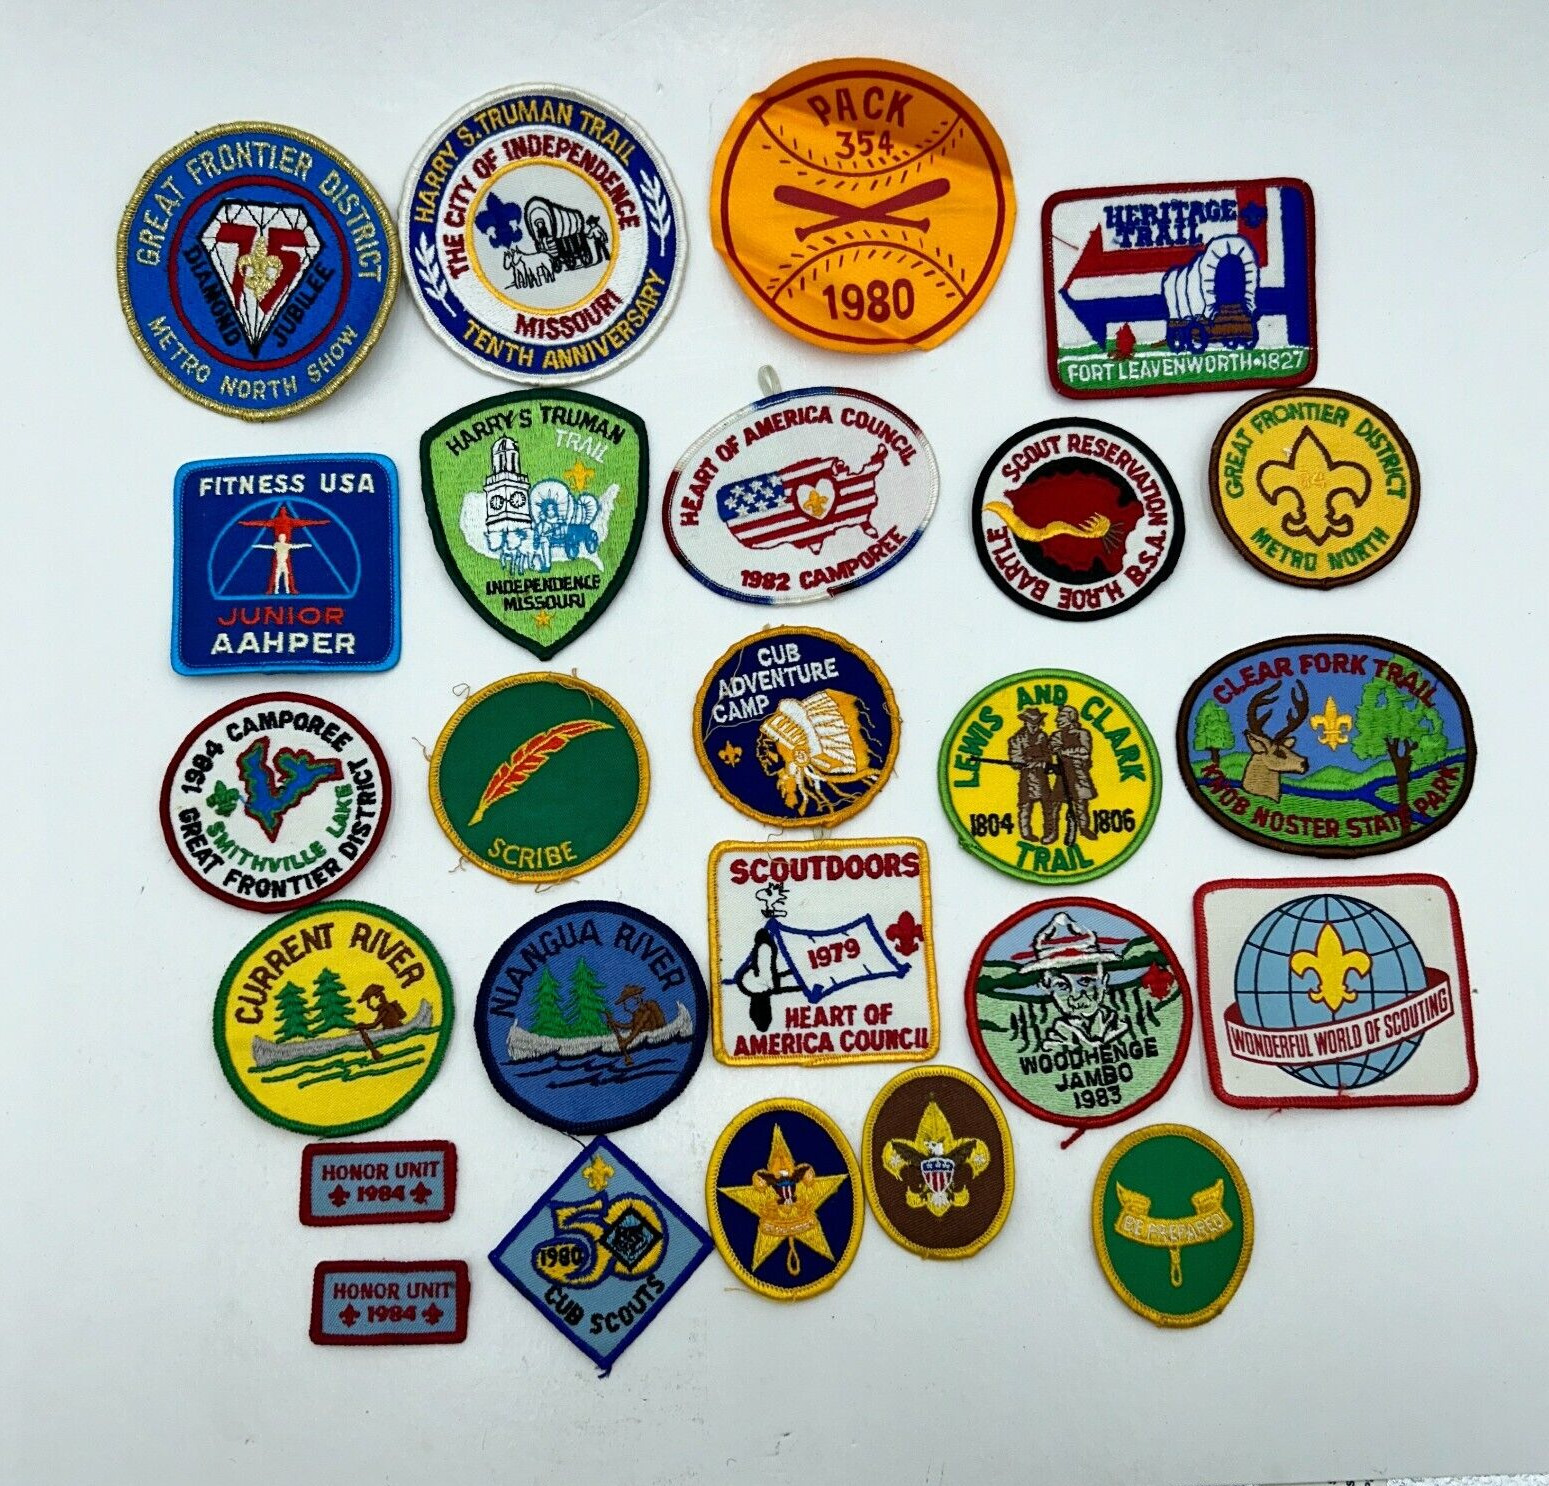 Boy Scouts of America Patches - Vintage 1980s Mixed Lot Heart of America BSA